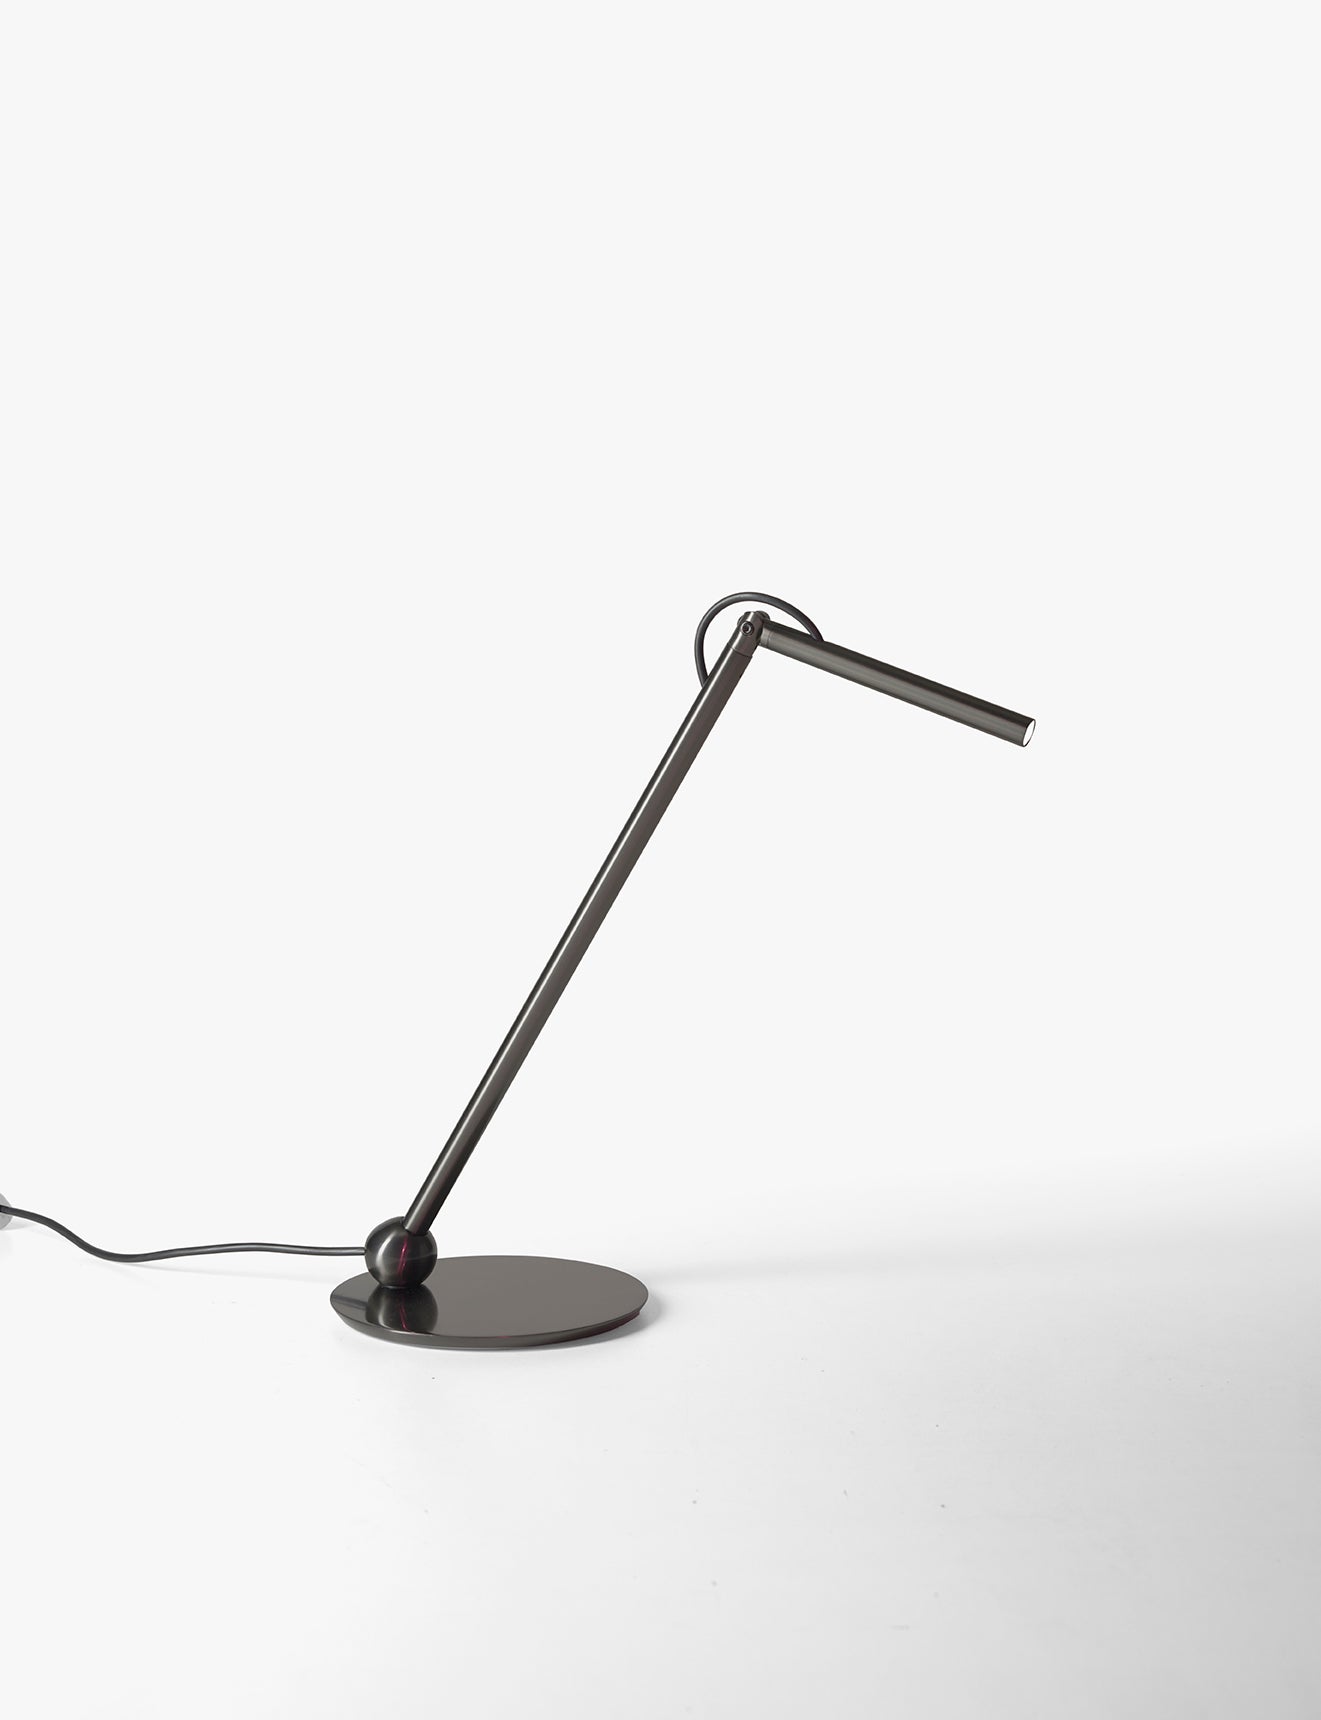 Extreme minimalism and freedom of movement.
Calamaio is a desk lamp that brings light where it is needed thanks to the rotation of the head mounted on a structure that is also mobile. The LED light source is positioned at the end of the lamp,